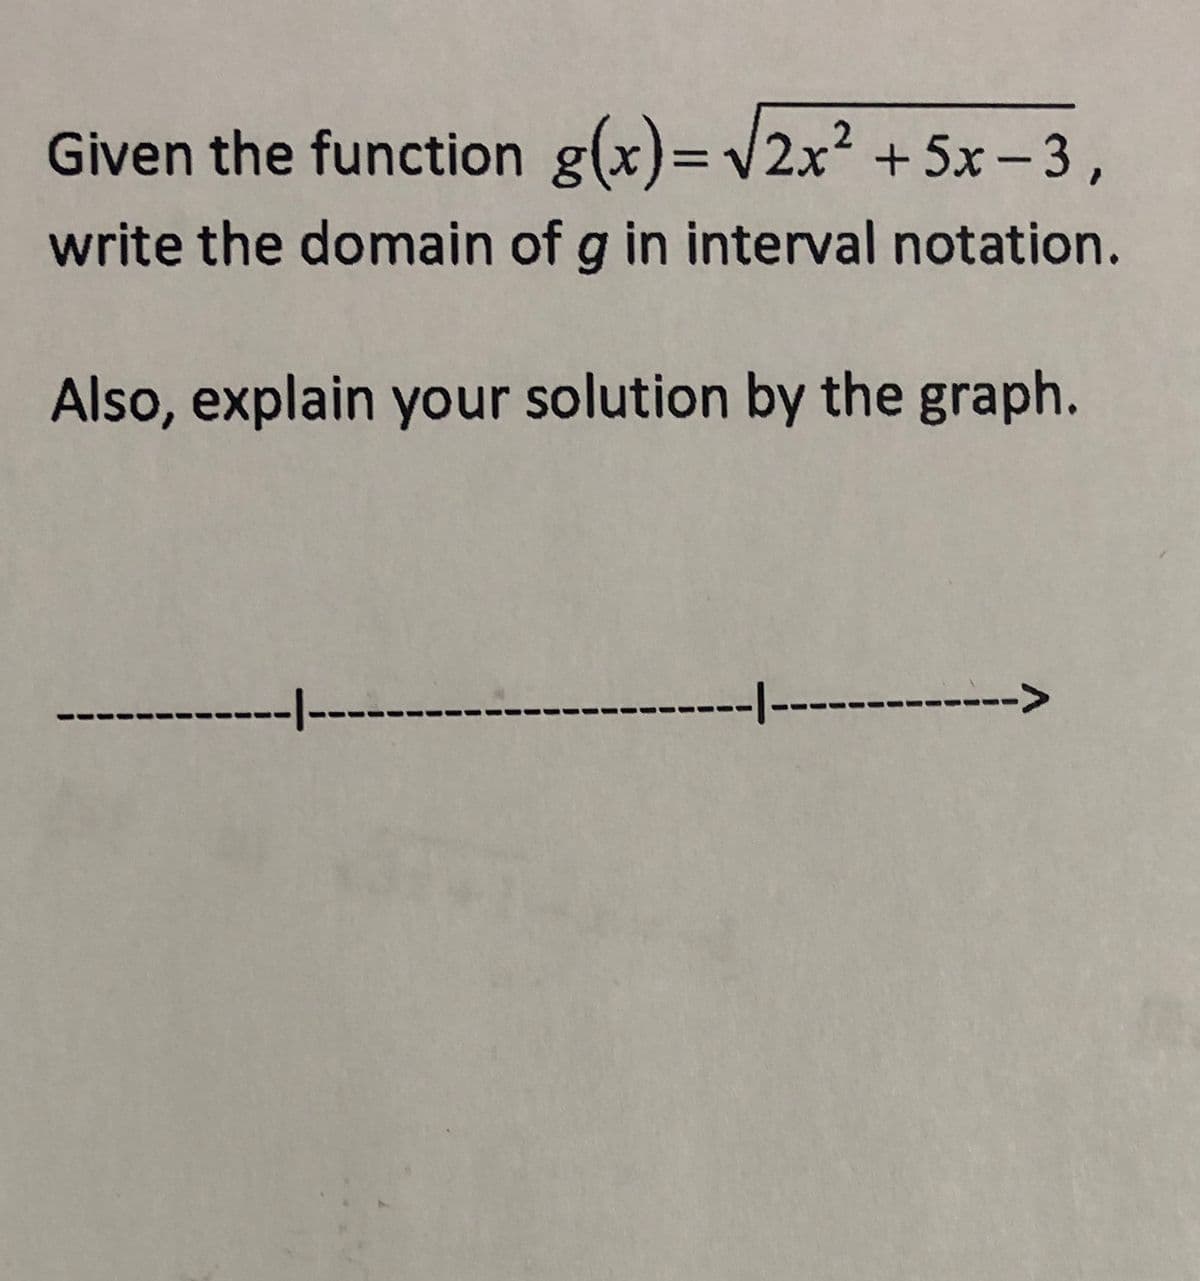 Given the function g(x)= v2x² +5x- 3,
write the domain of g in interval notation.
Also, explain your solution by the graph.
---
-----
